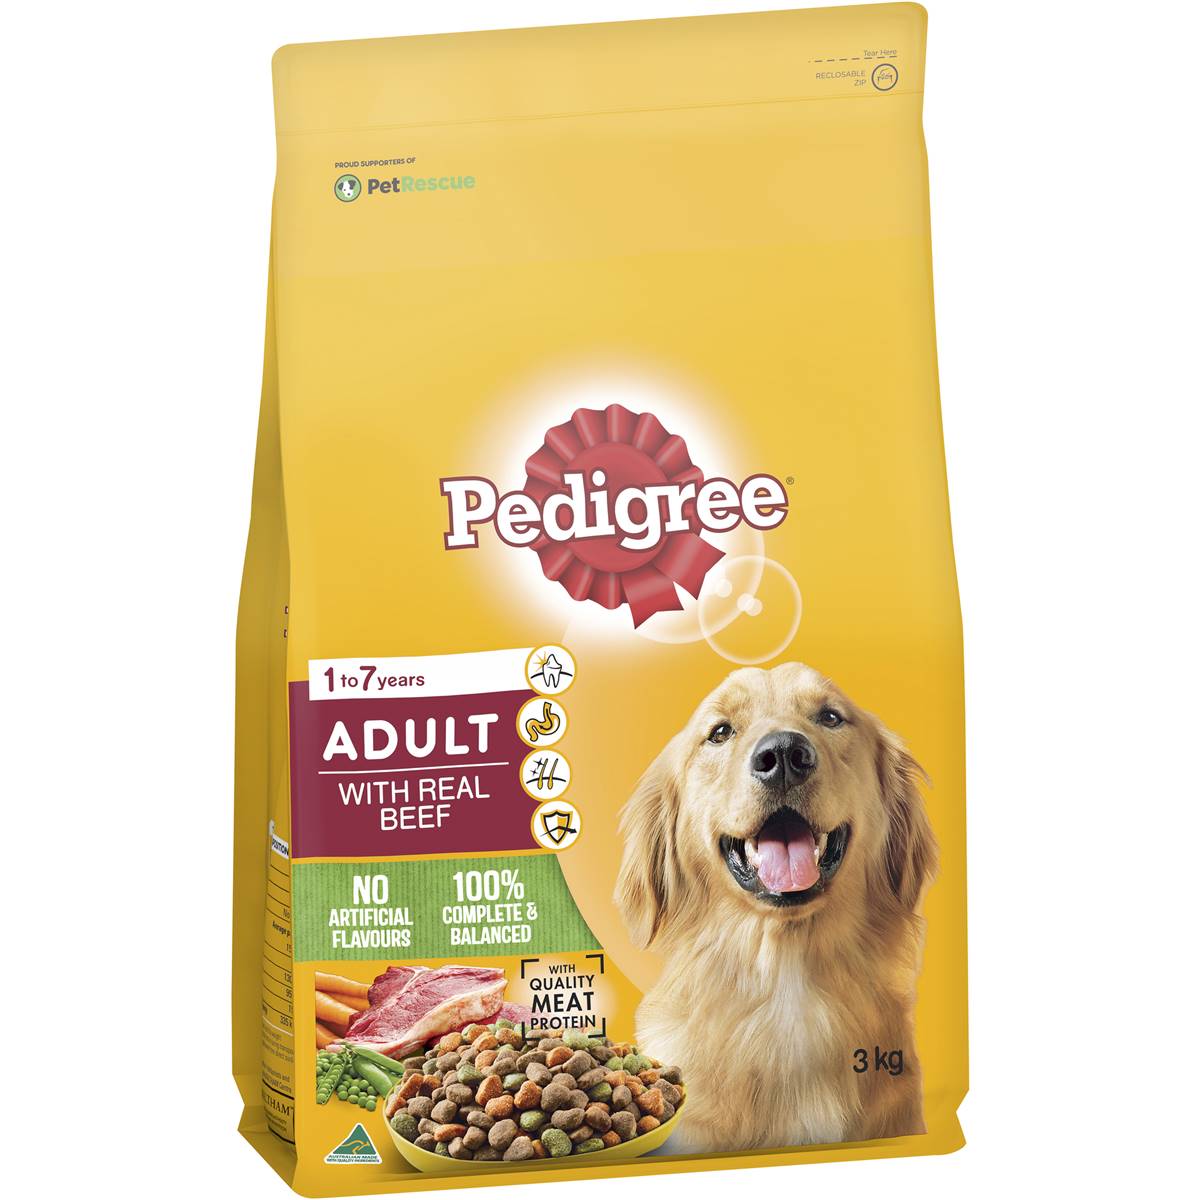 Pedigree Adult Dog Food With Real Beef